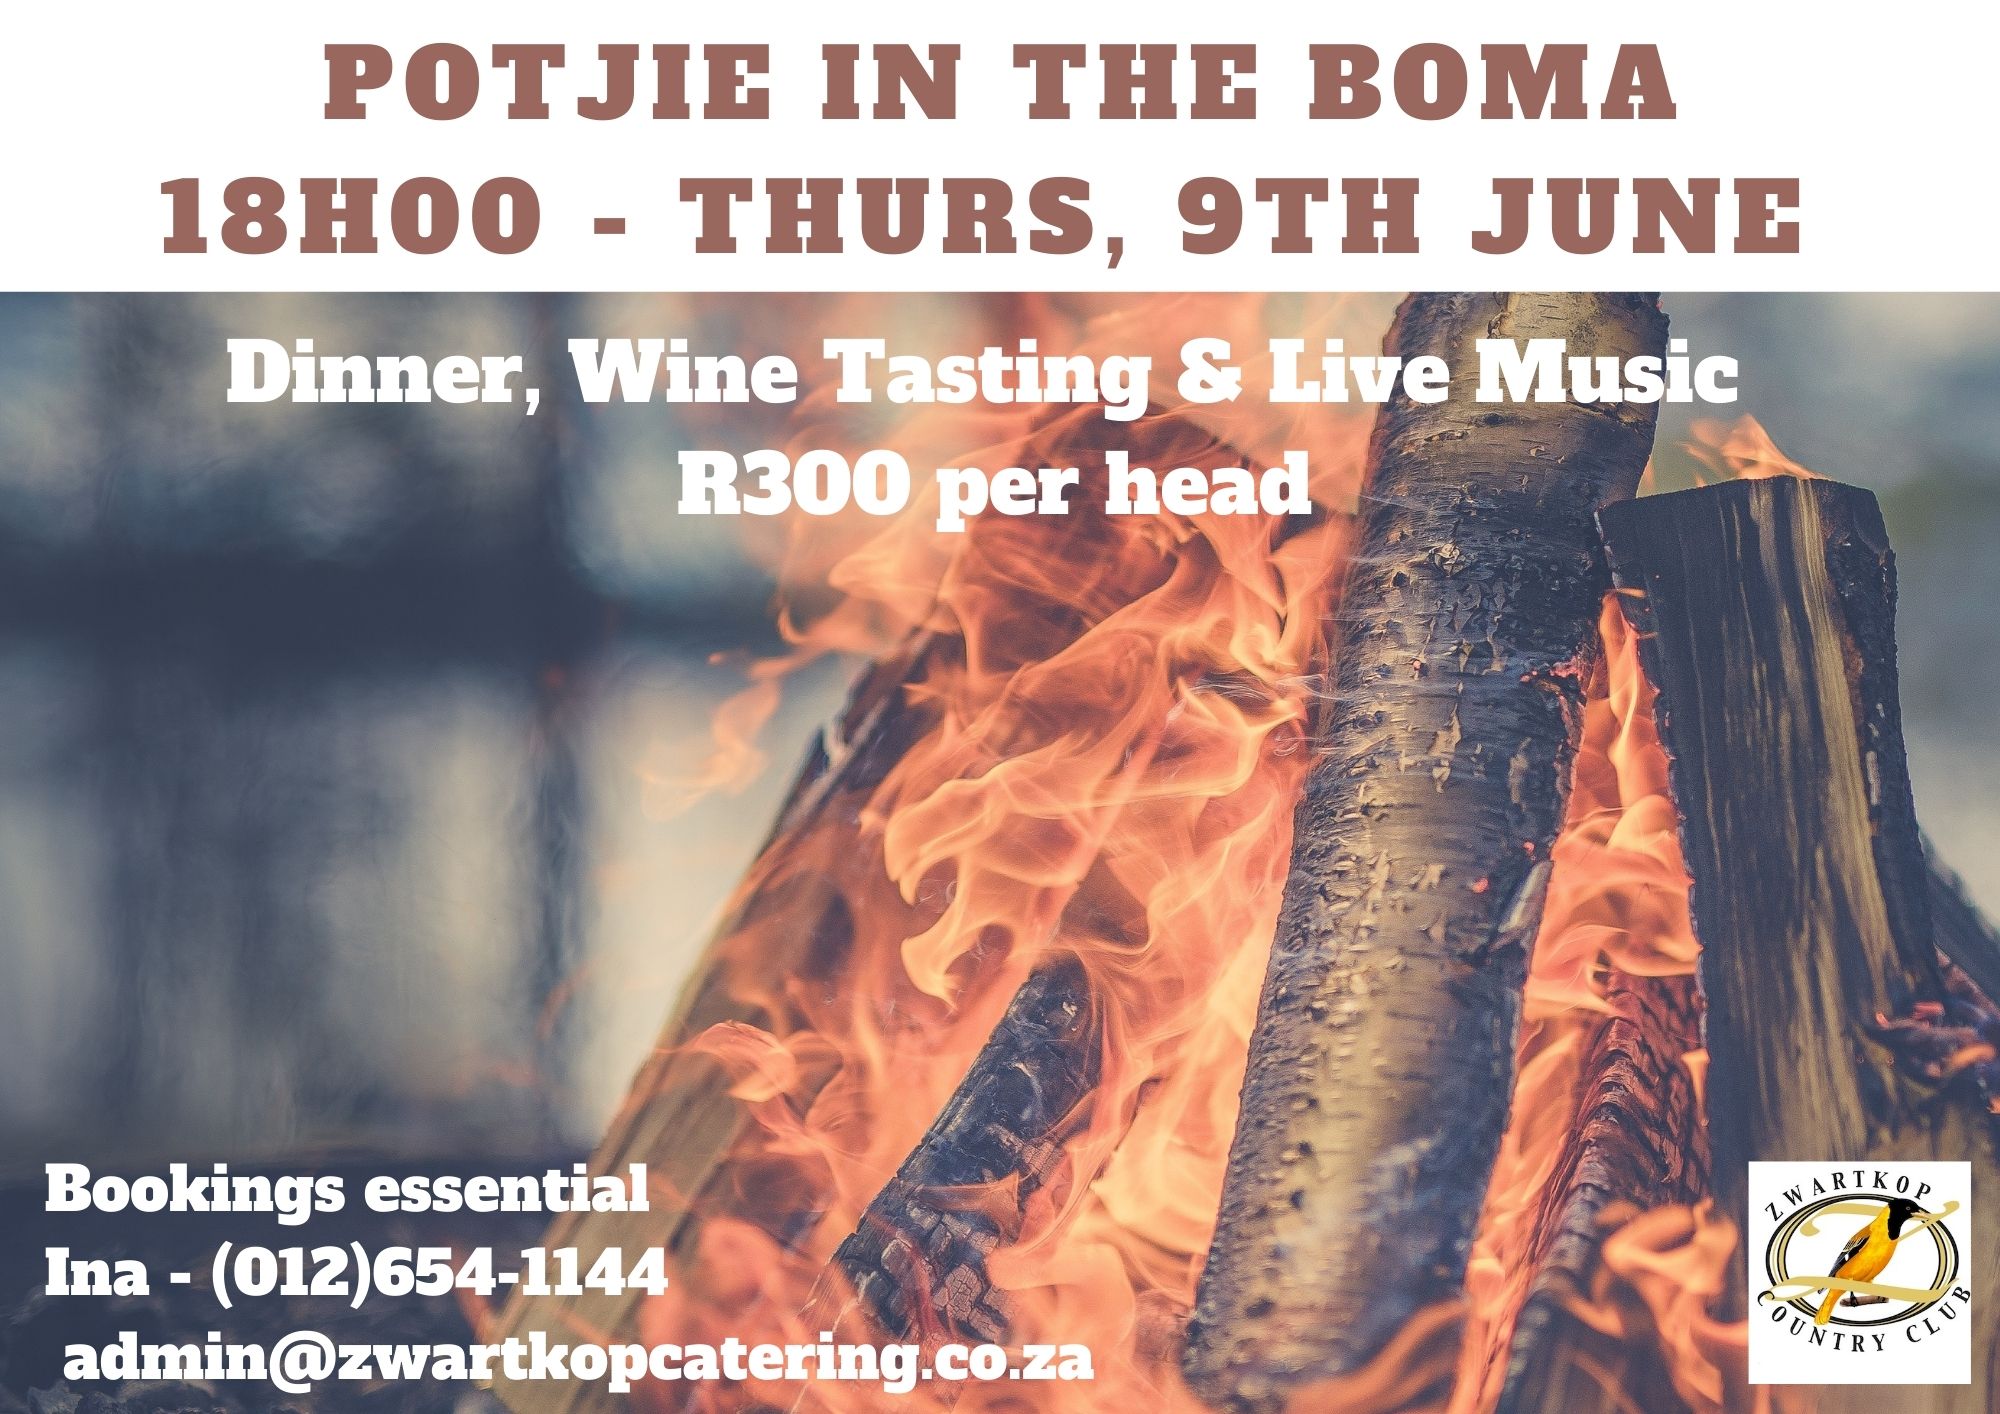 Potjie in the Boma